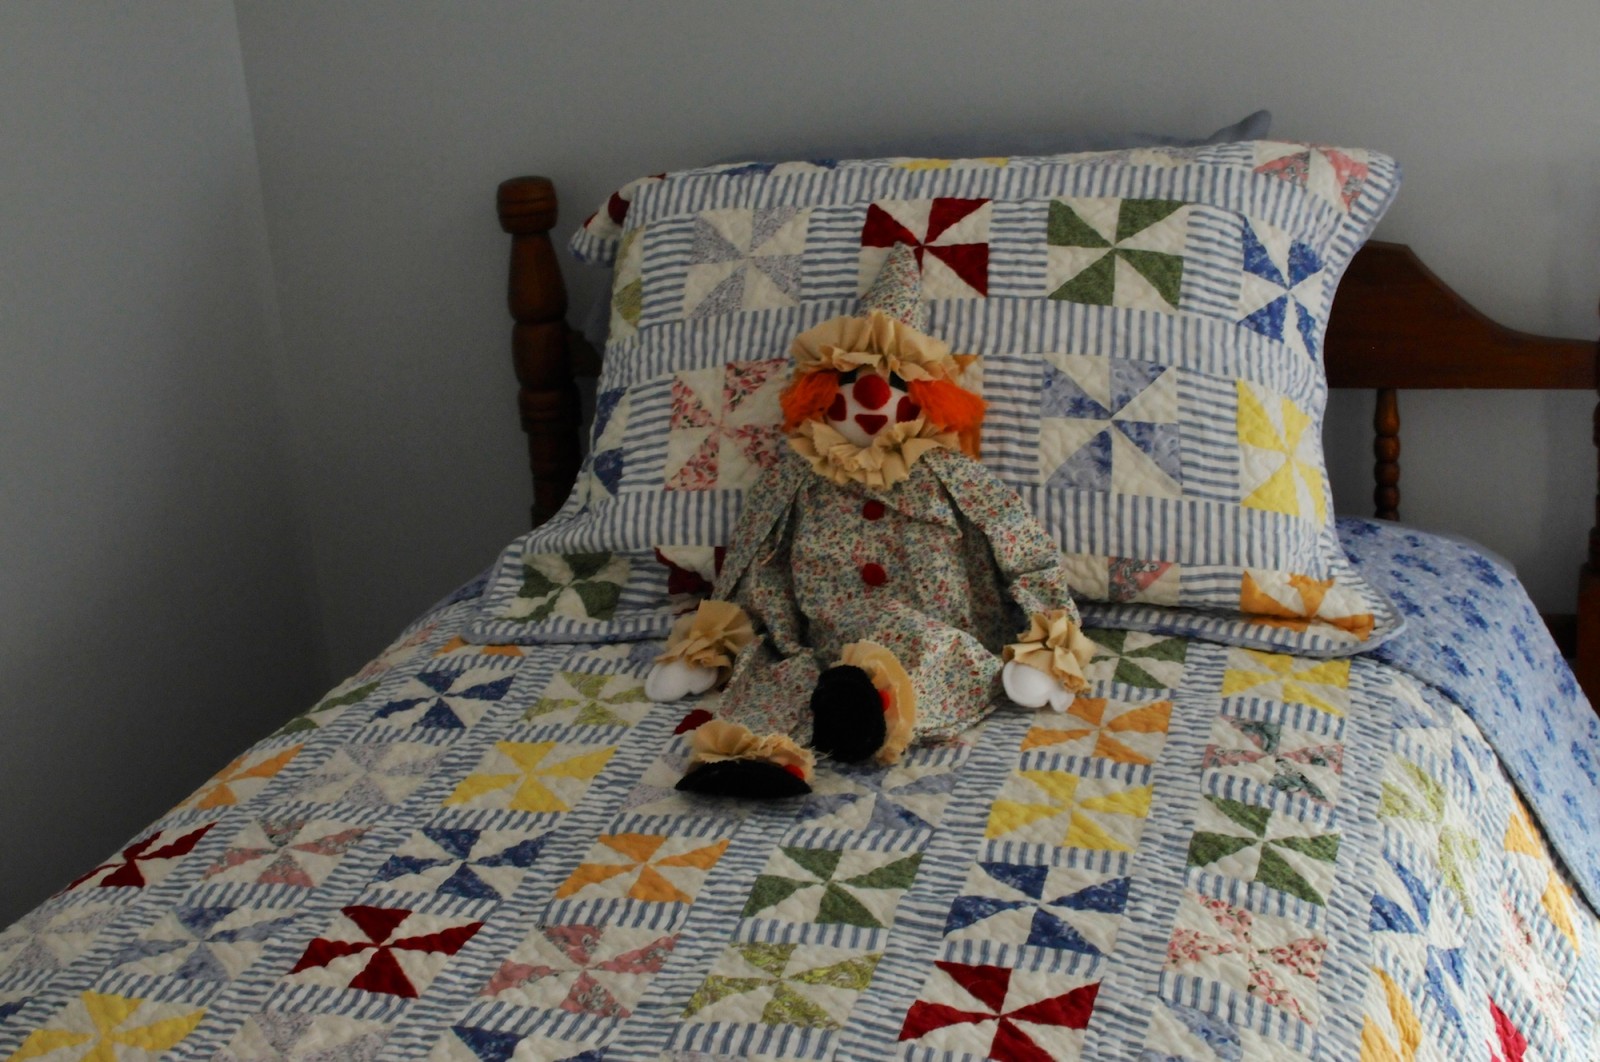 A doll rests on a bed in "The Waltons" house. (WTOP/Ed Kelleher)